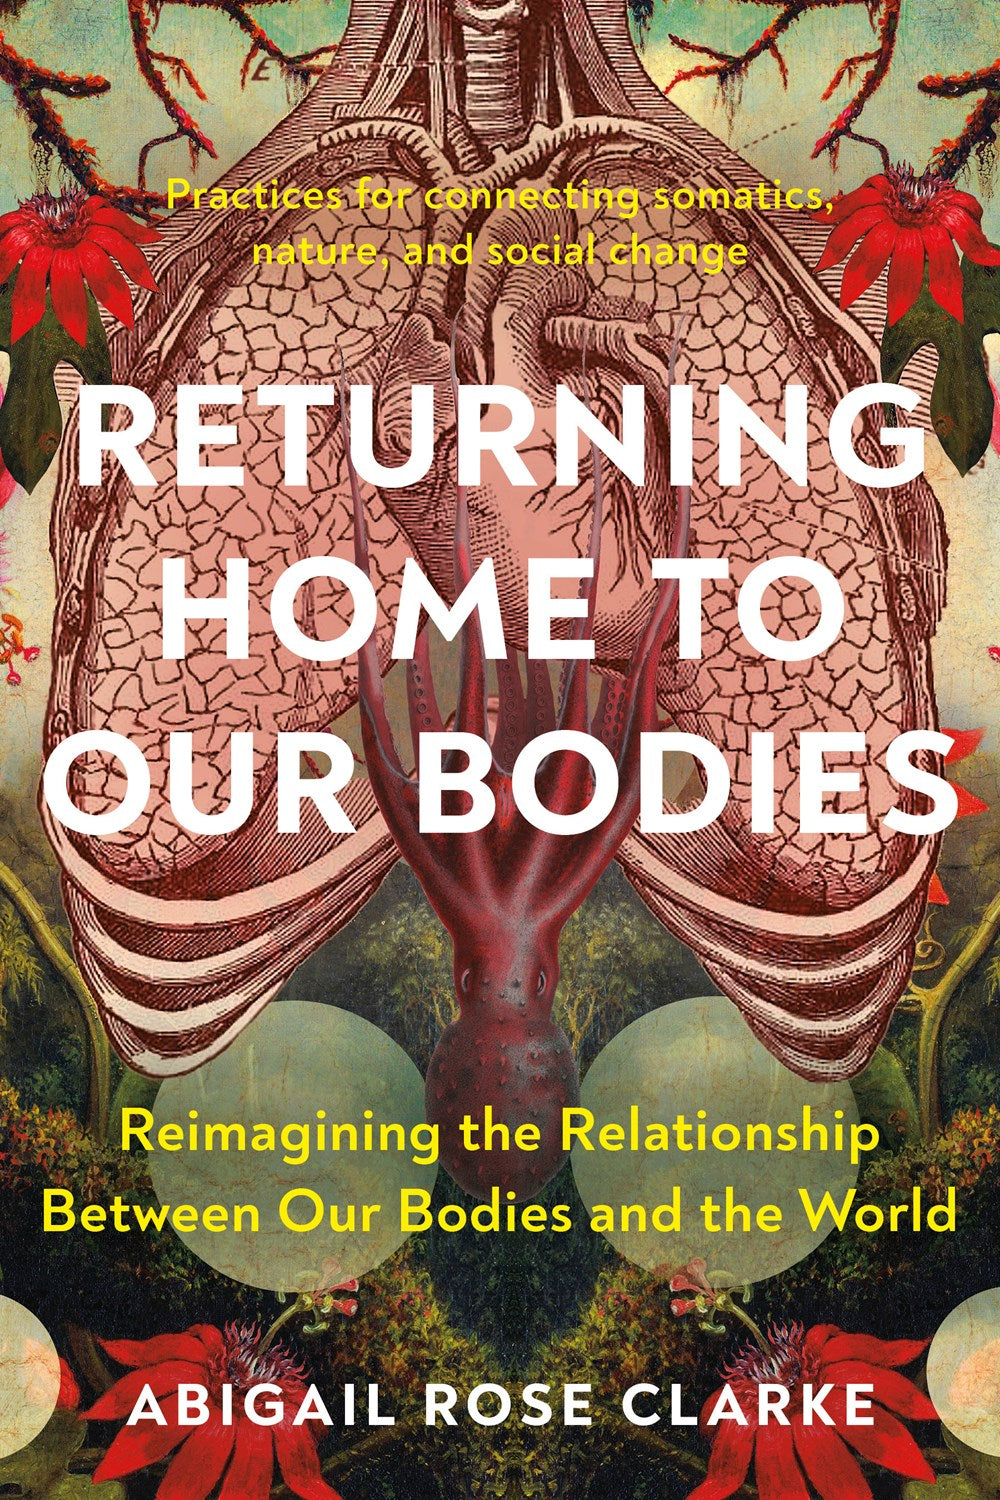 Returning Home to Our Bodies : Reimagining the Relationship Between Our Bodies and the World--Practices for connecting somatics, nature, and social change